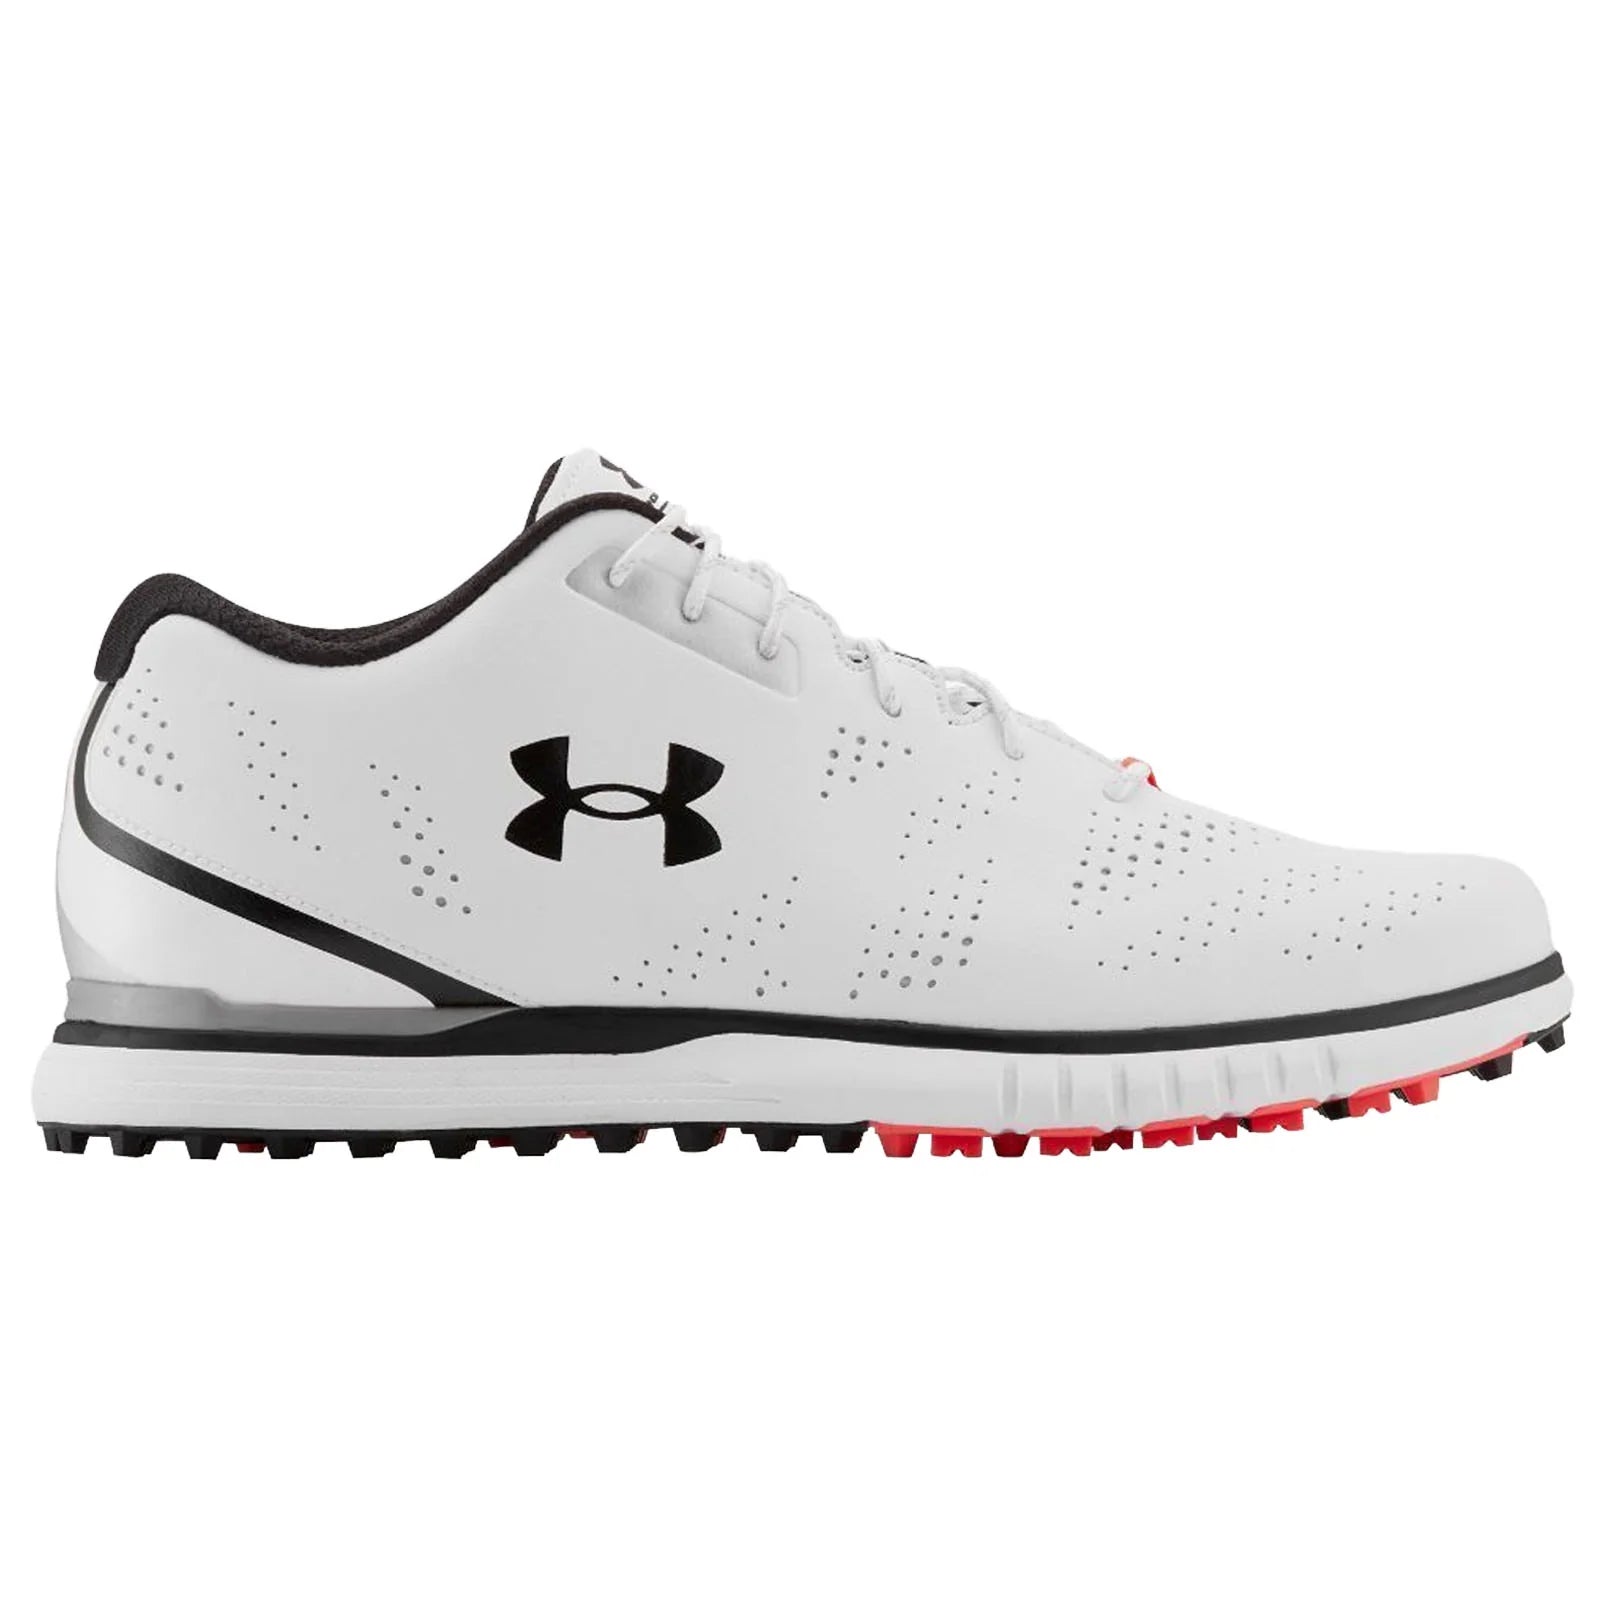 Under Armour Glide SL Golf Shoes 3024576